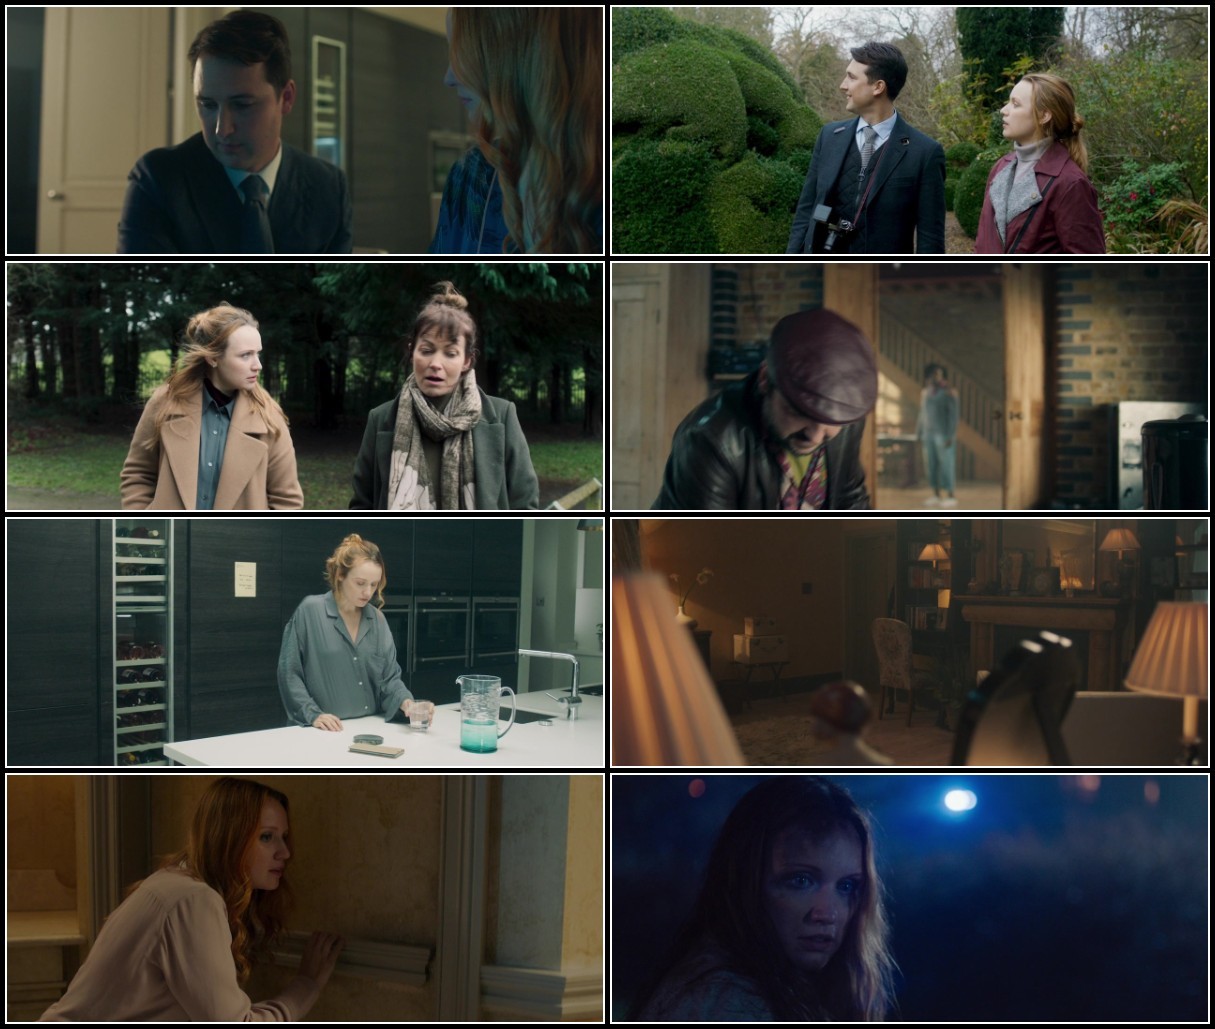 The Stranger in Our Bed (2022) 720p BluRay x264-GUACAMOLE IzXbHs5K_o